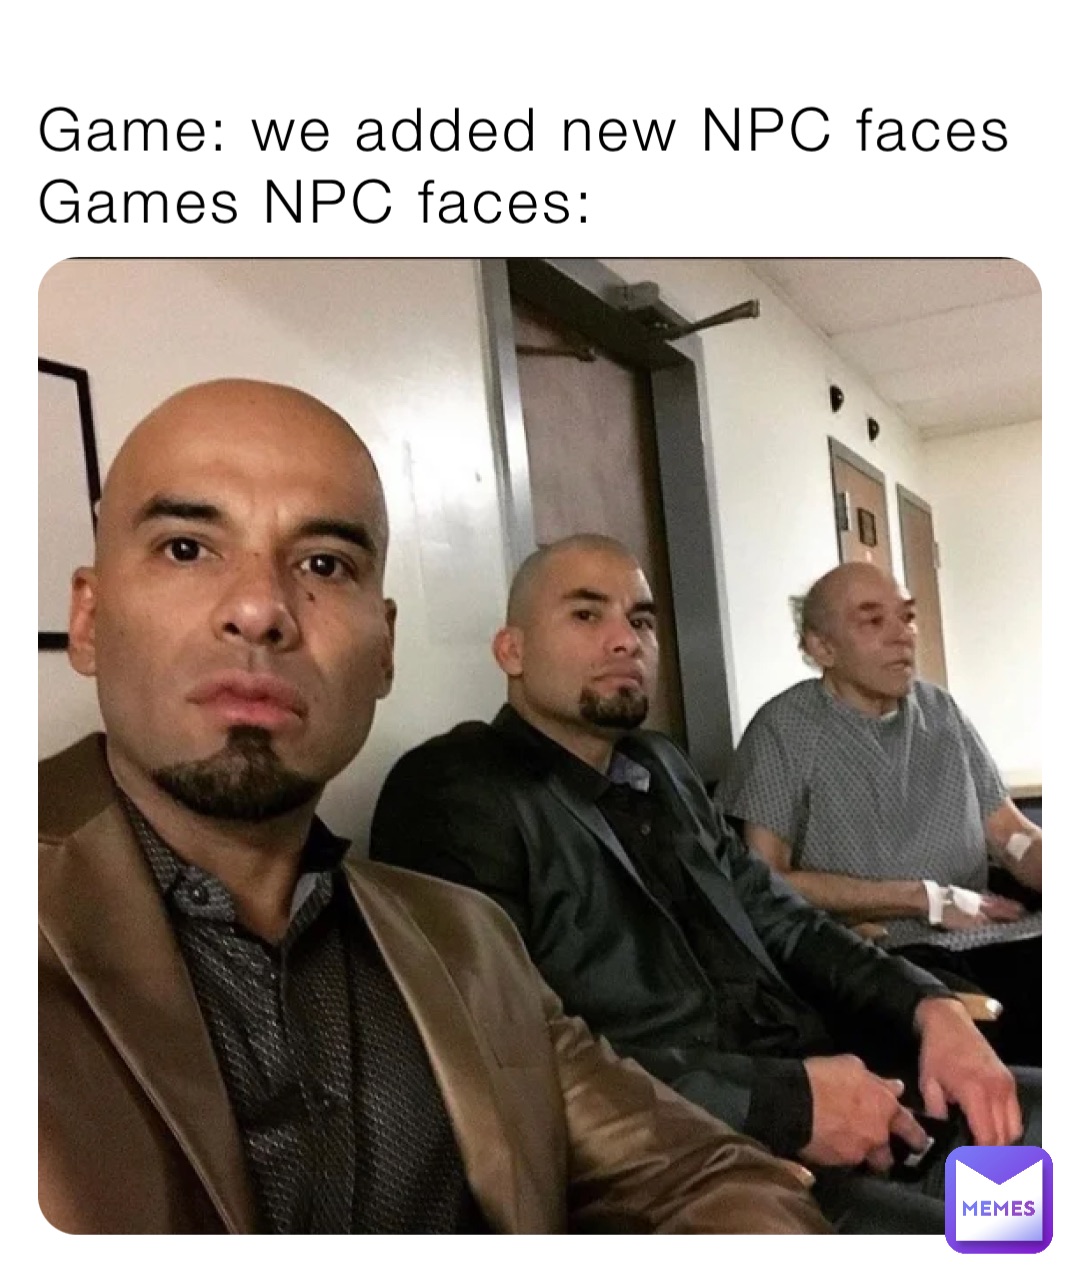 Game: we added new NPC faces
Games NPC faces: